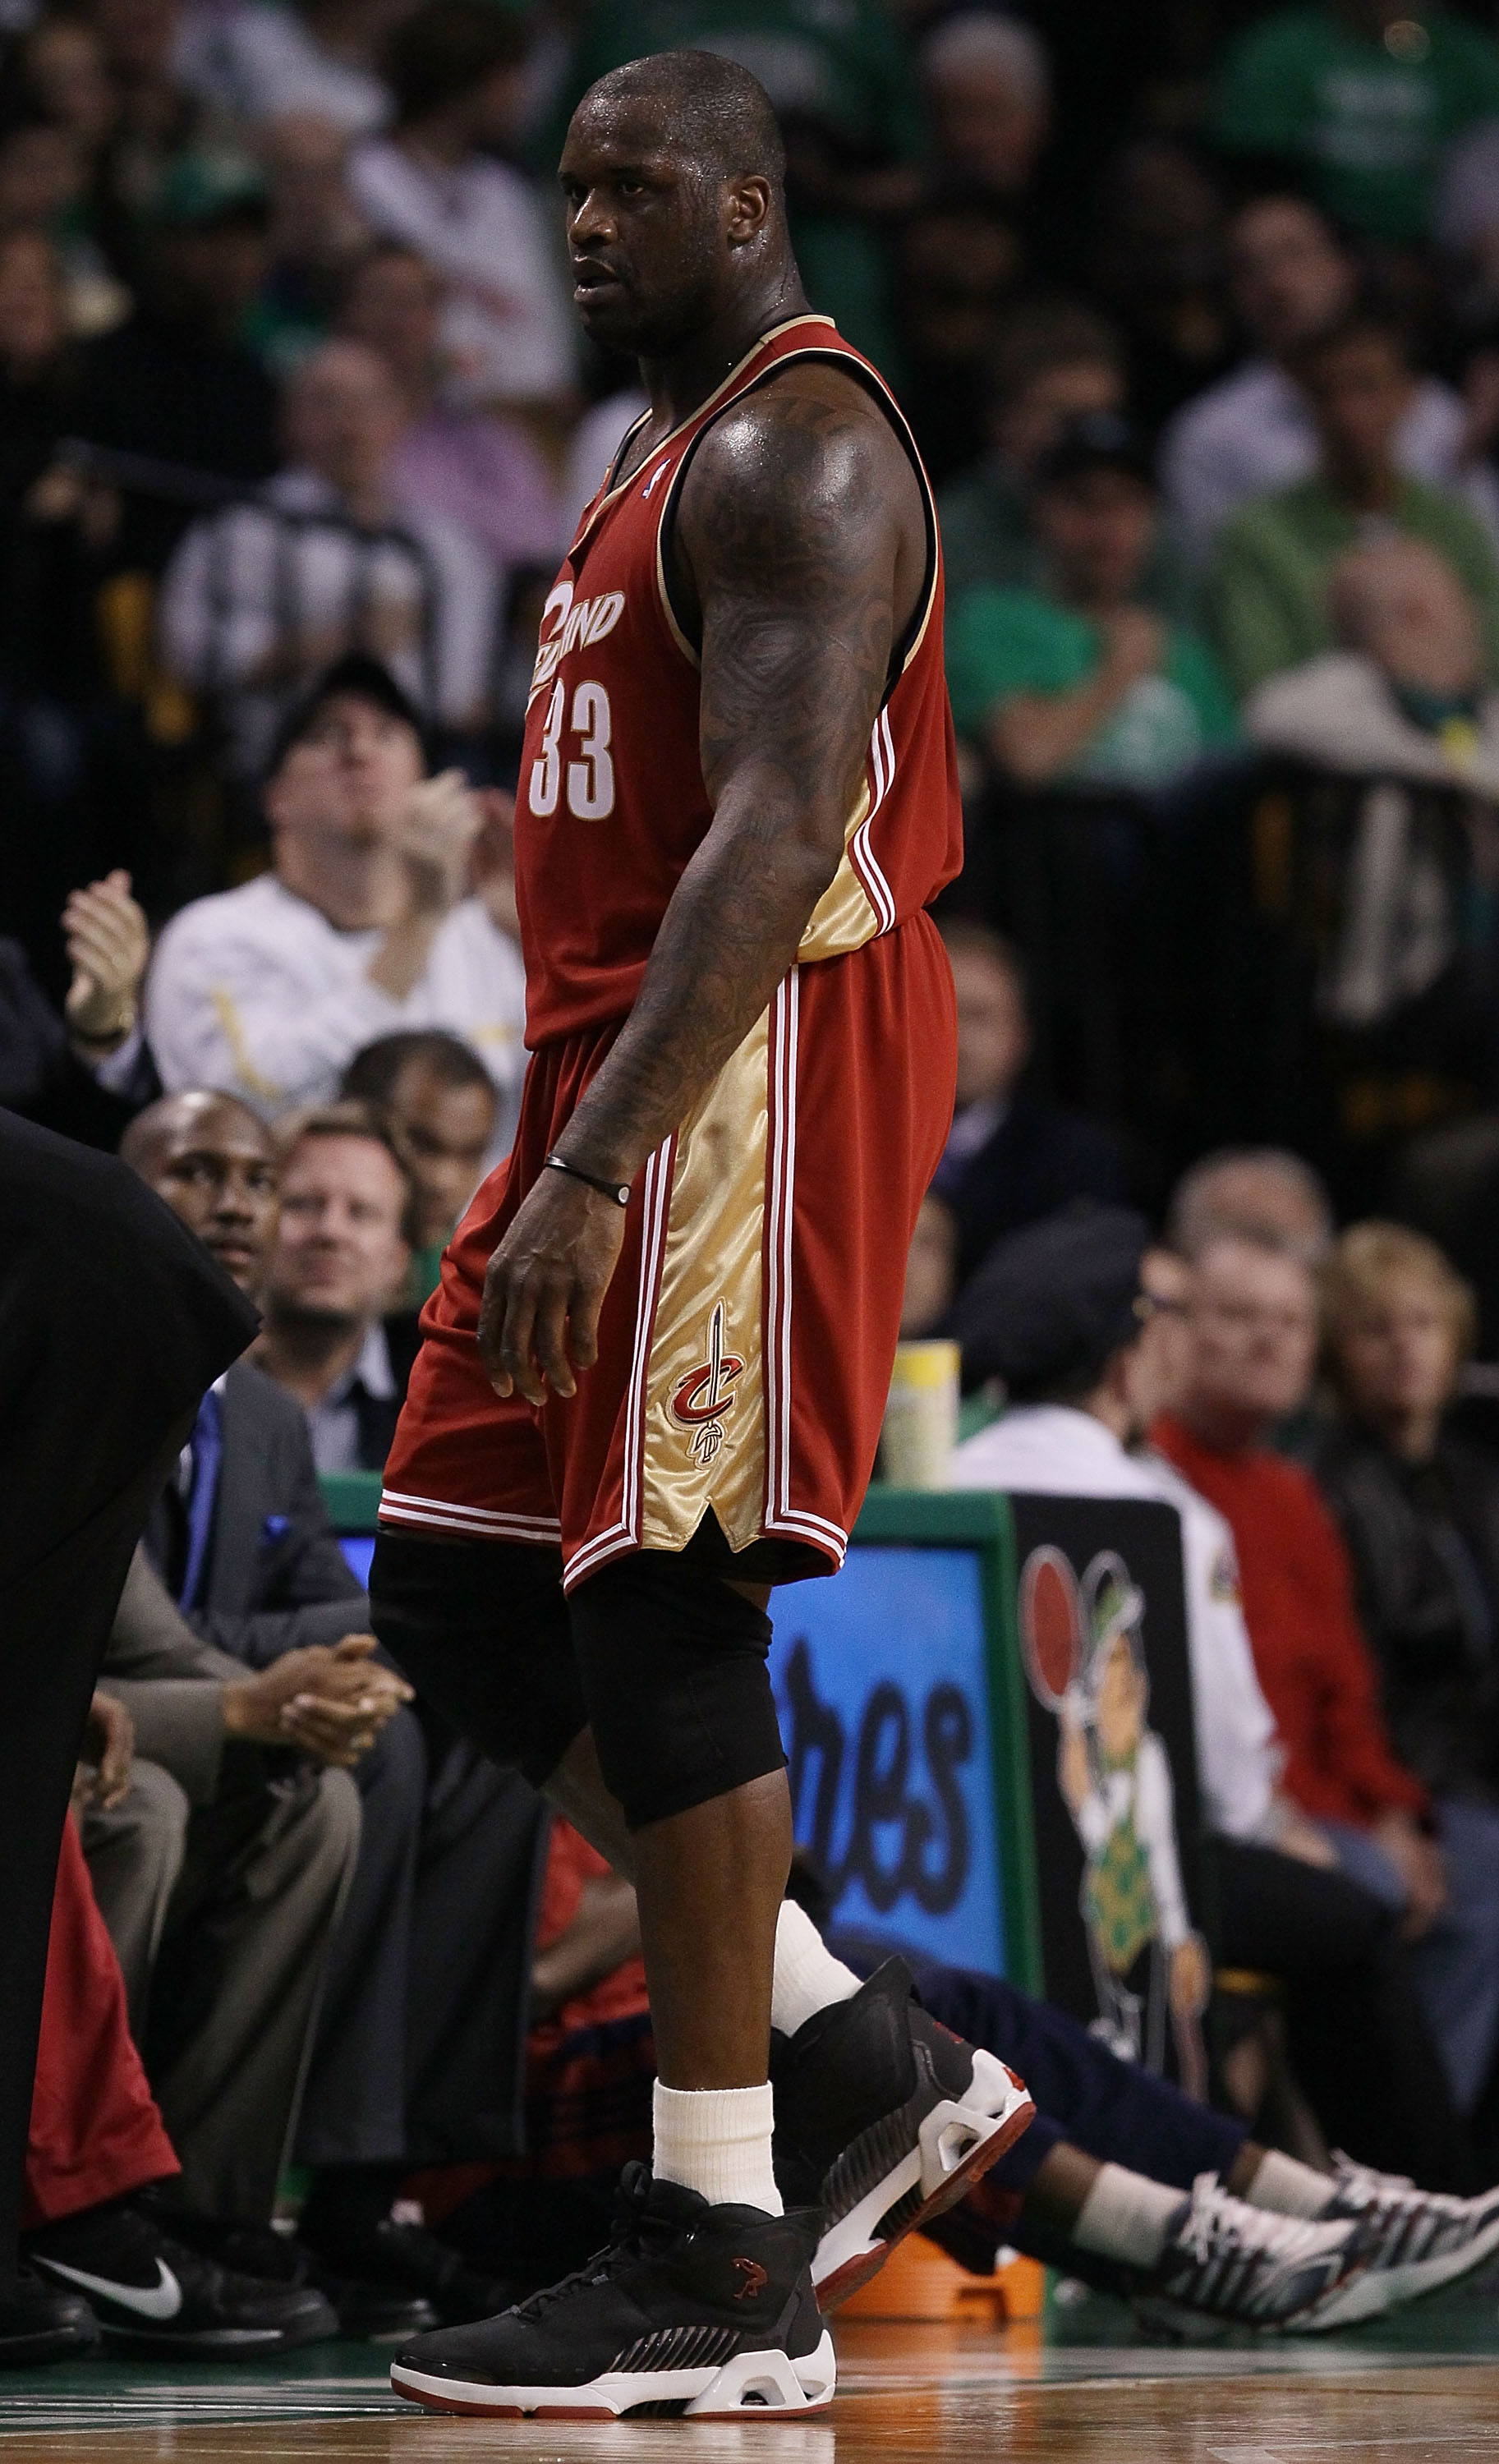 BOSTON - MAY 13:  Shaquille O'Neal #33 of the Cleveland Cavaliers walks to the bench after he is taken out of the game against the Boston Celtics during Game Six of the Eastern Conference Semifinals of the 2010 NBA playoffs at TD Garden on May 13, 2010 in